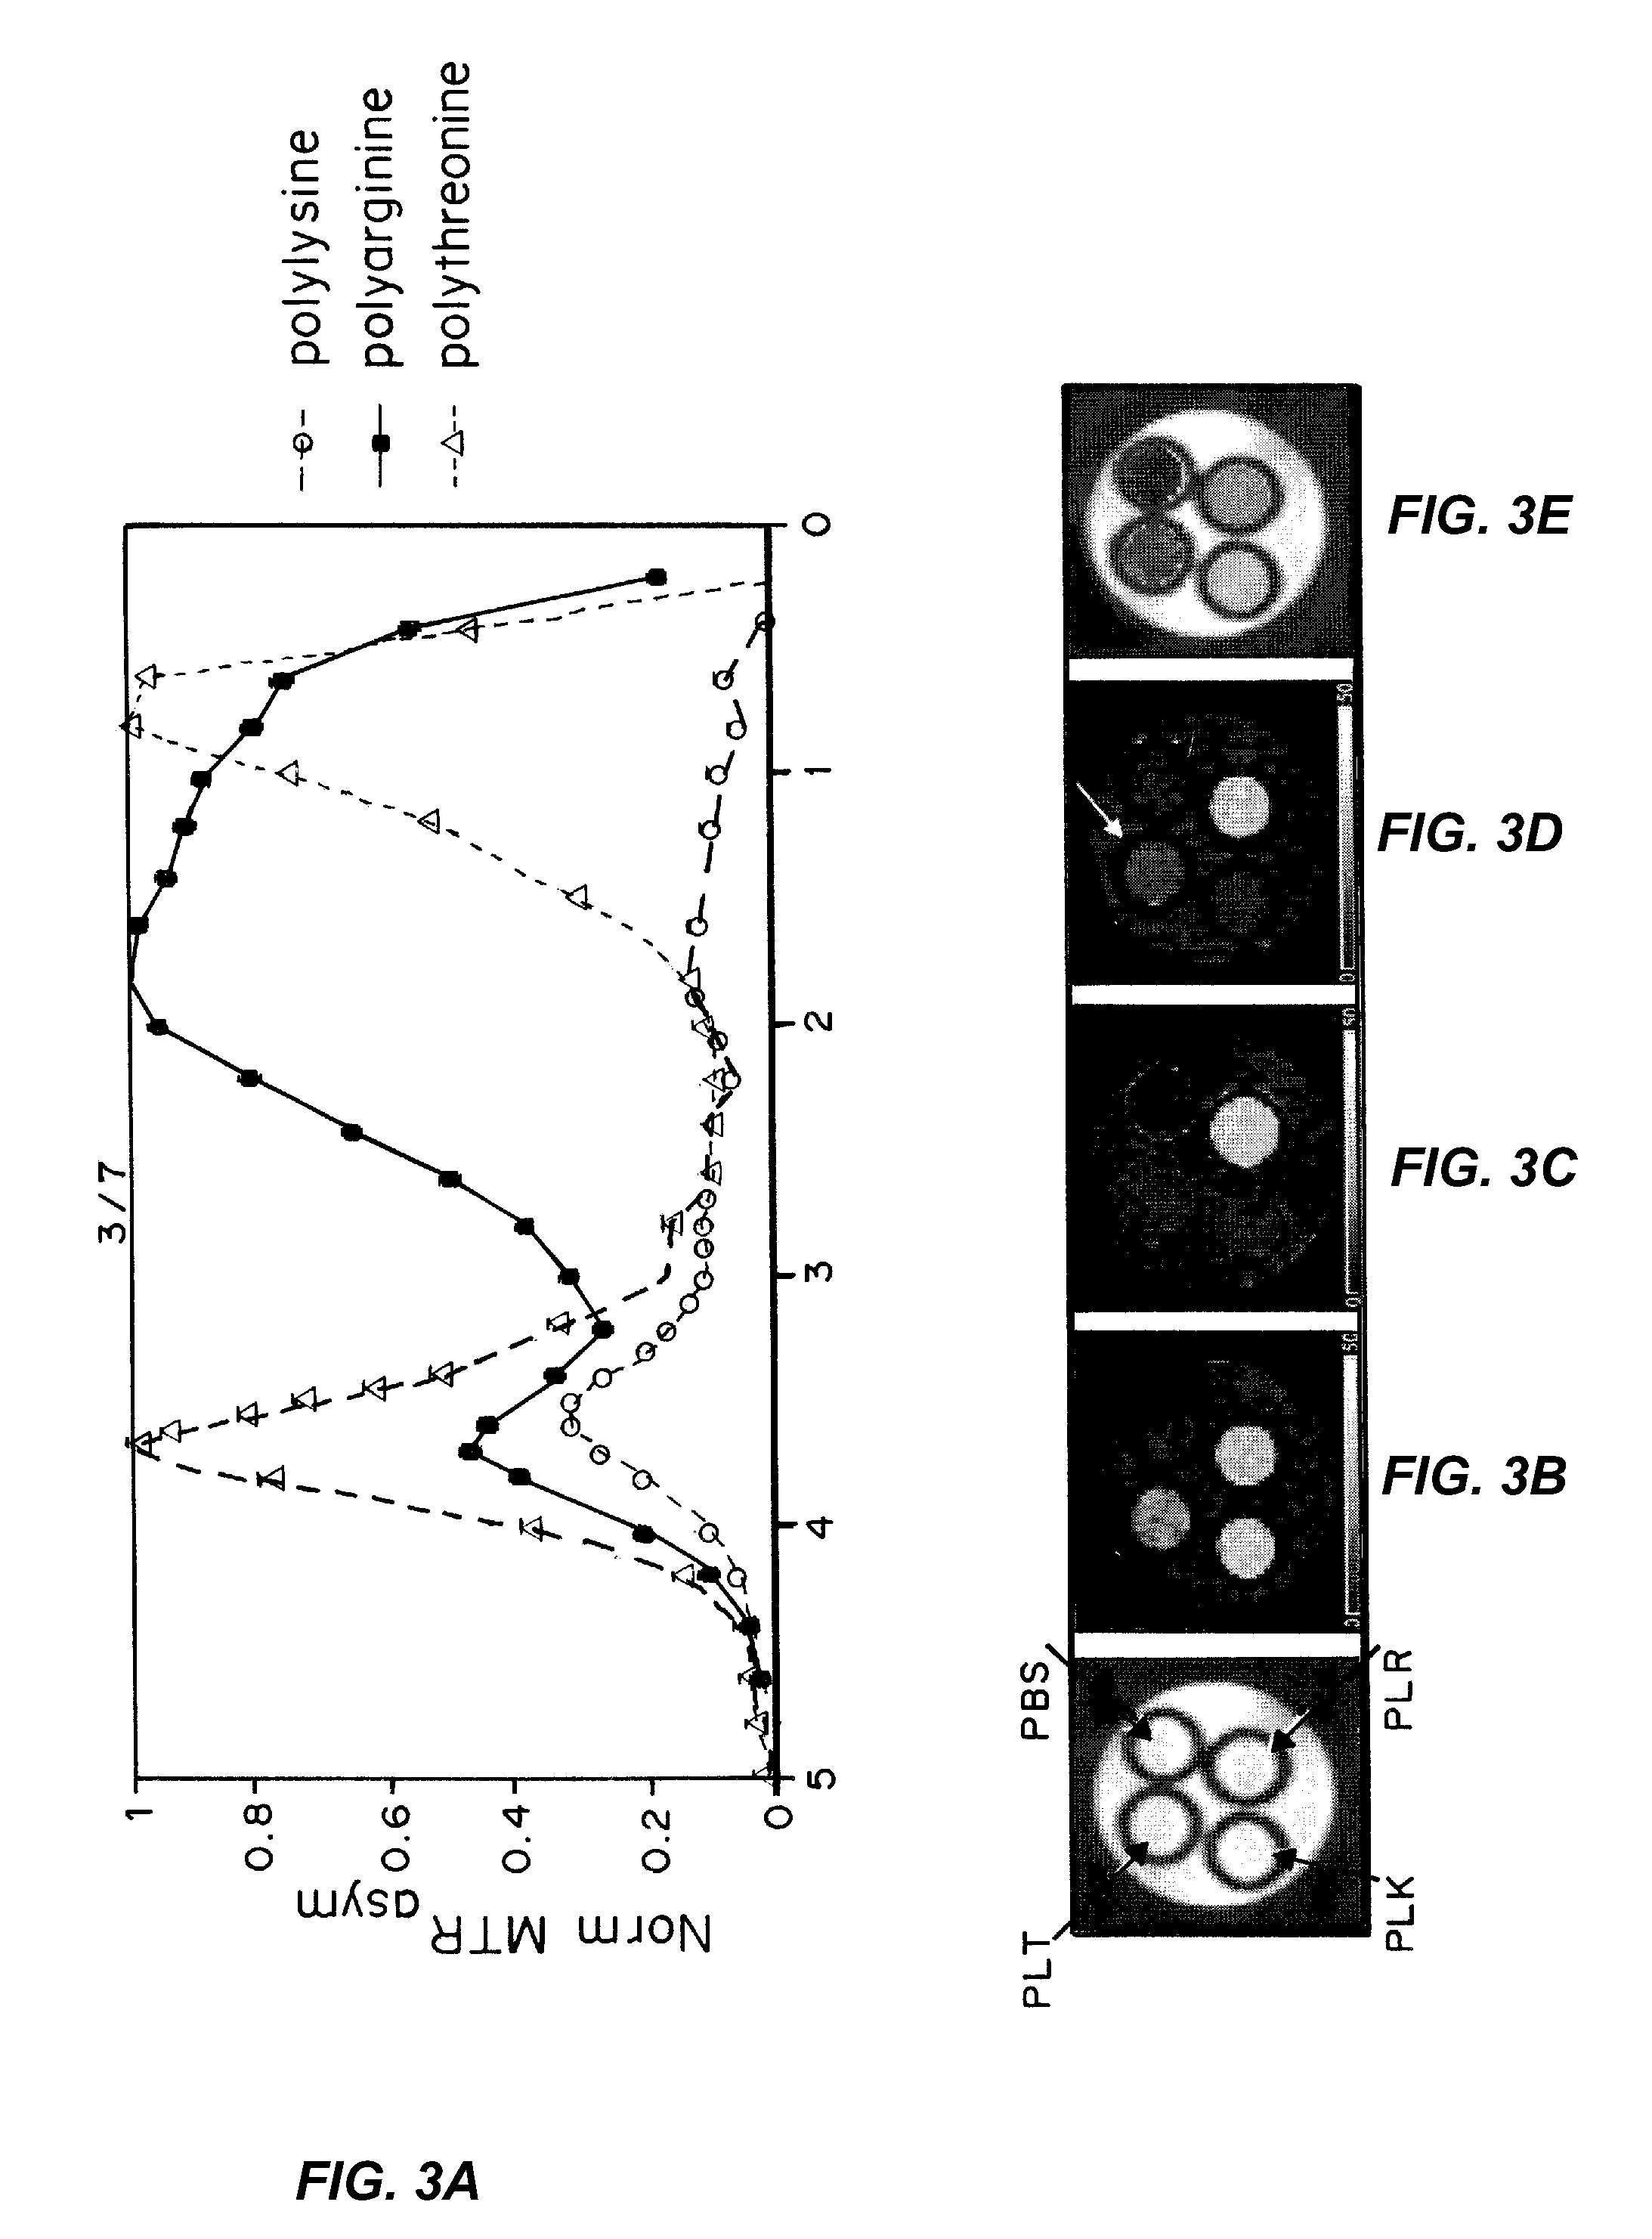 Nanoparticles for magnetic resonance imaging tracking and methods of making and using thereof